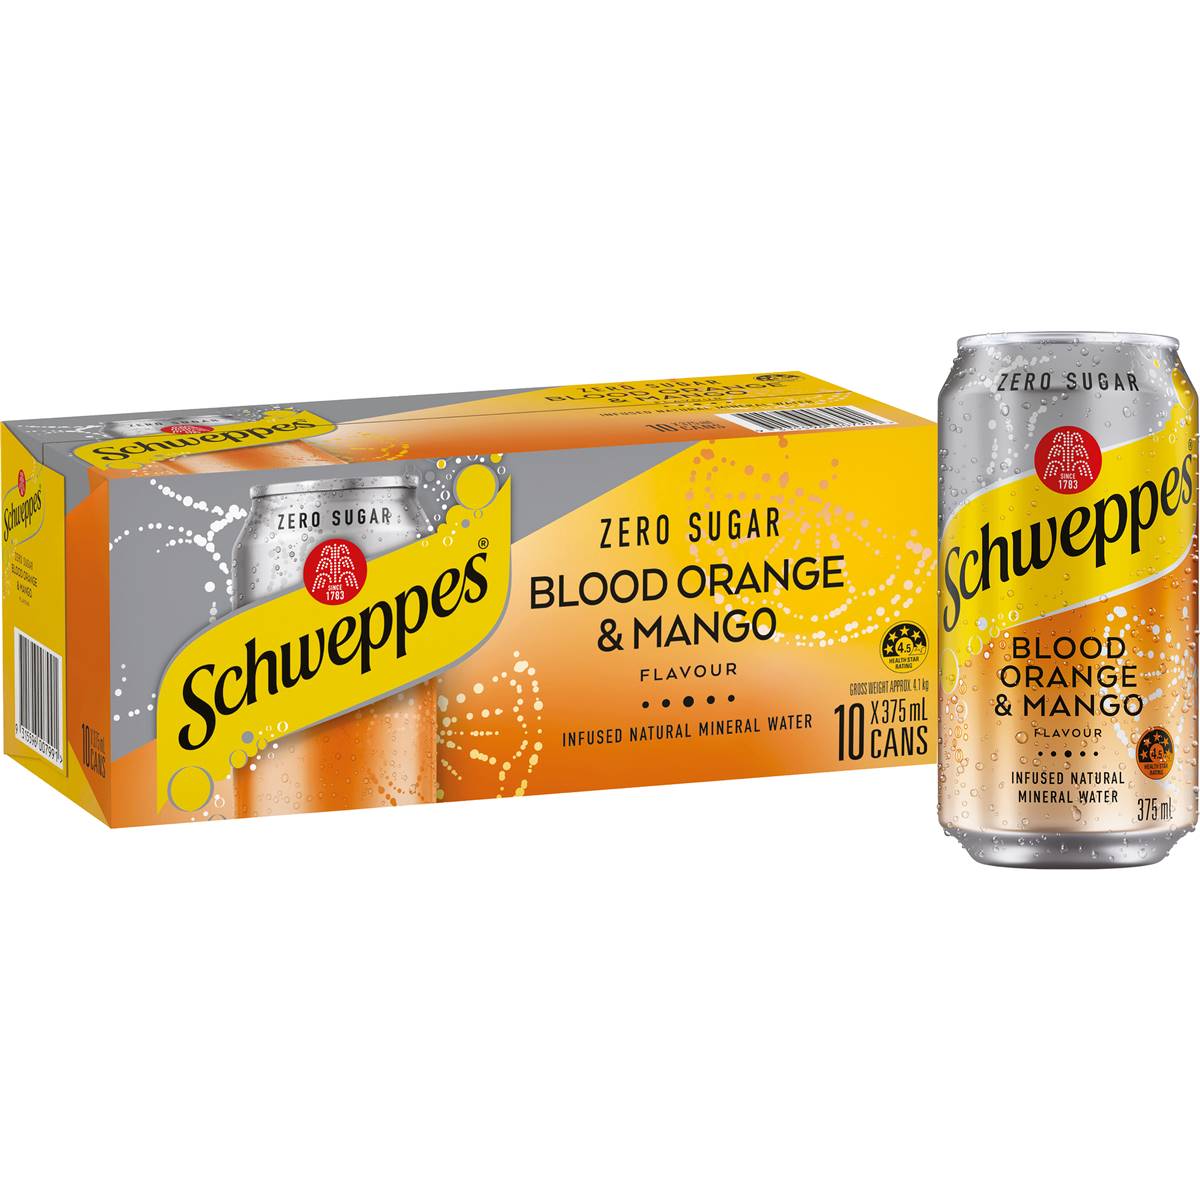 Calories in Schweppes Infused Natural Mineral Water Blood Orange & Mango